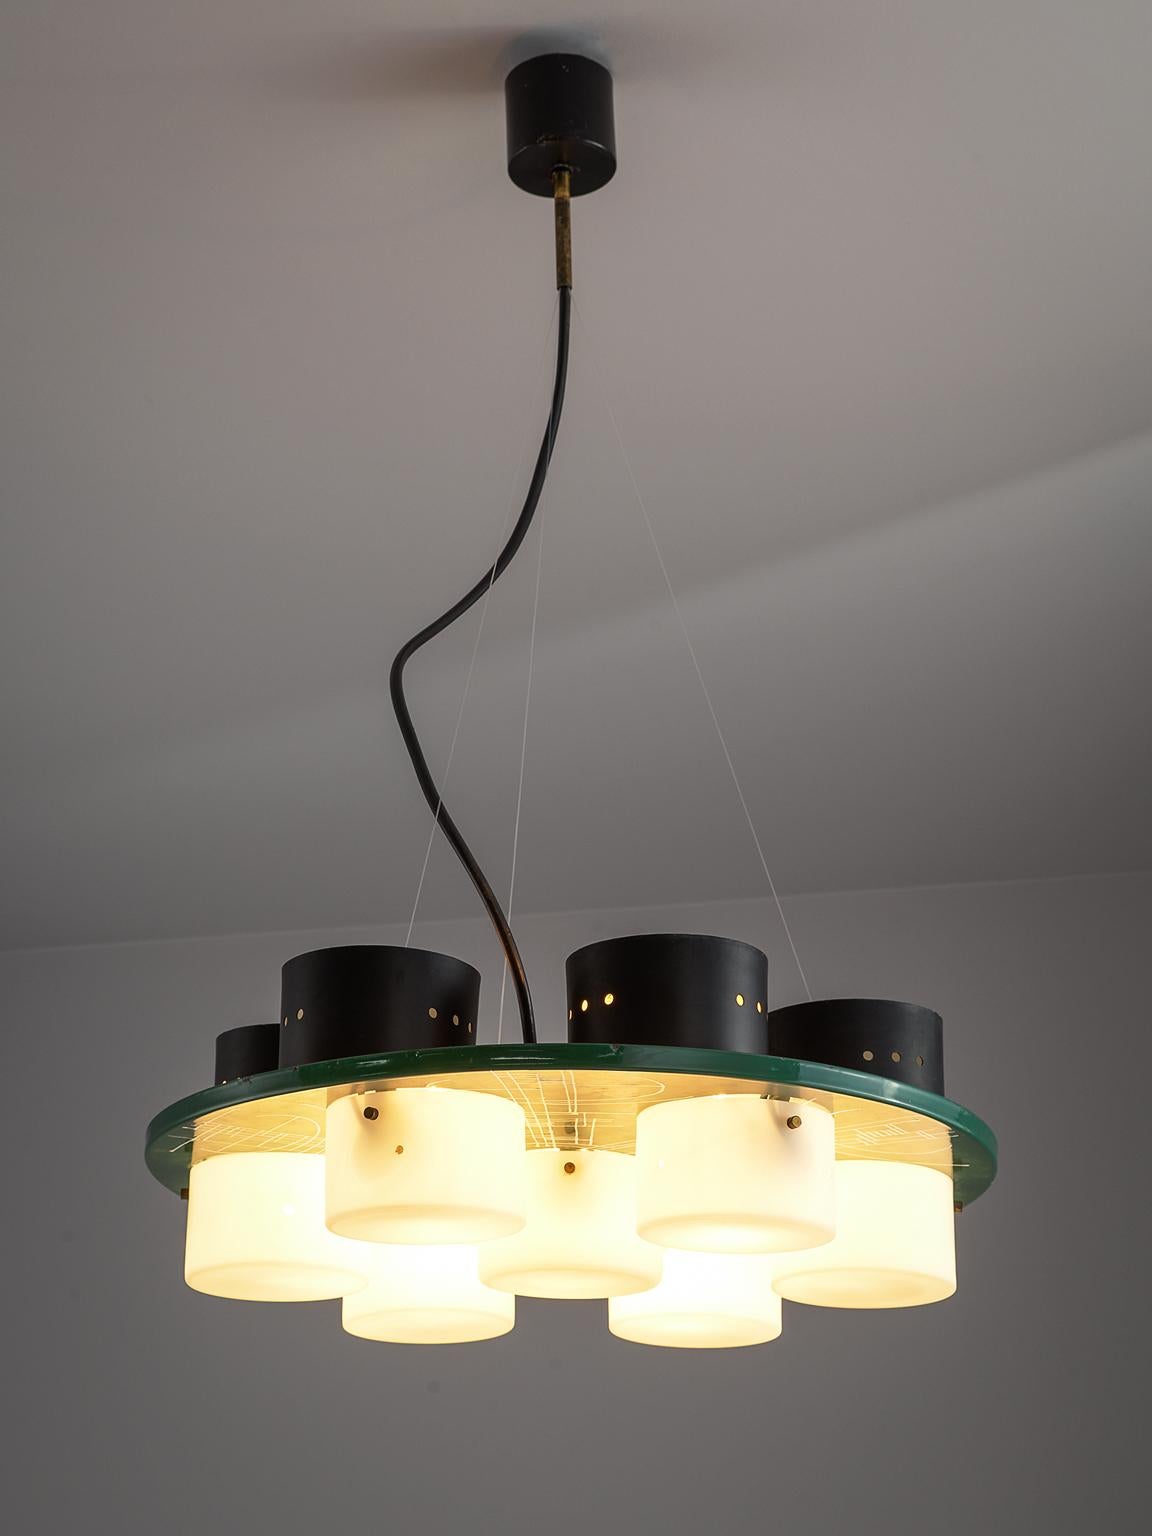 Suspension lamp, metal, glass and lacquered wood, Italy, 1970s

These Italy ceiling lights feature a circular base that holds 6 glass shades. The green and white lacquered base shows an abstract drawings, consisting of white lines. Due to its